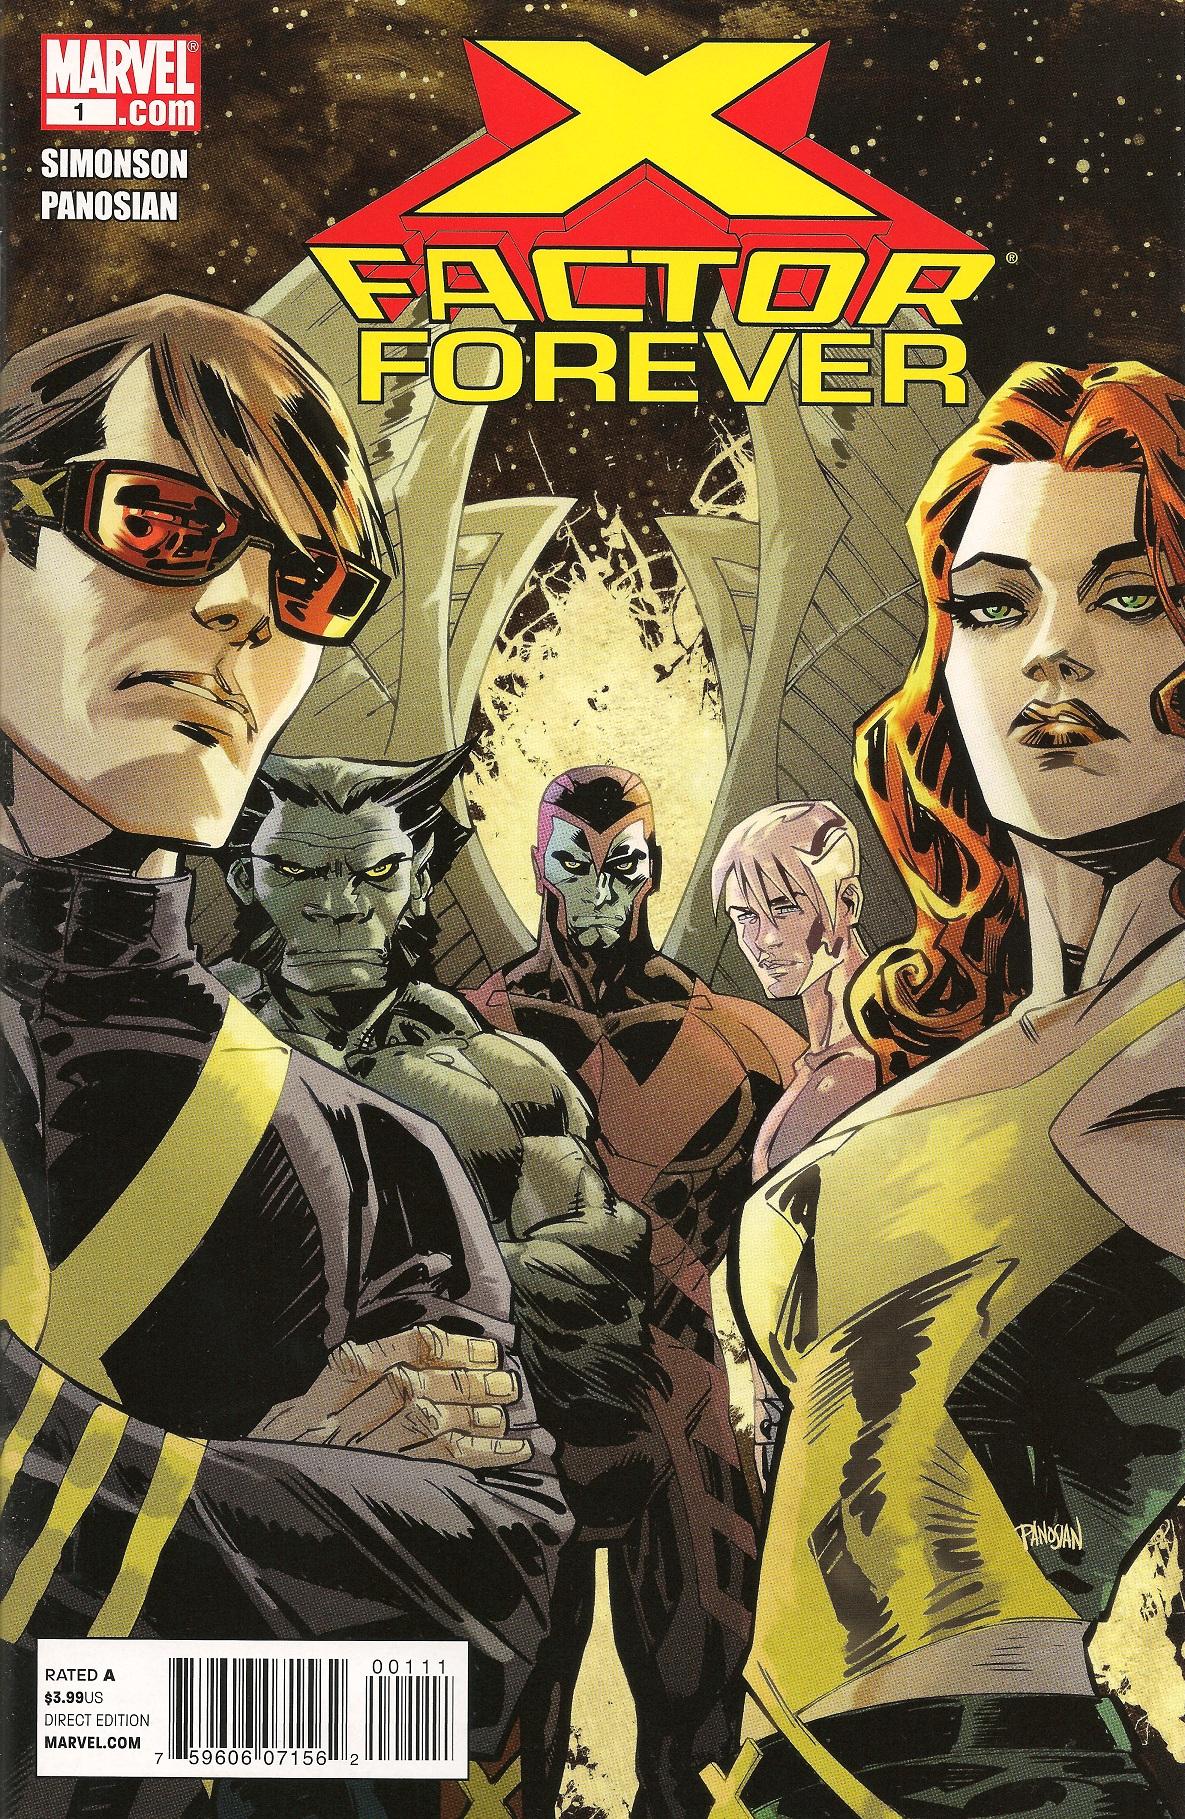 X-Factor Forever Vol. 1 #1